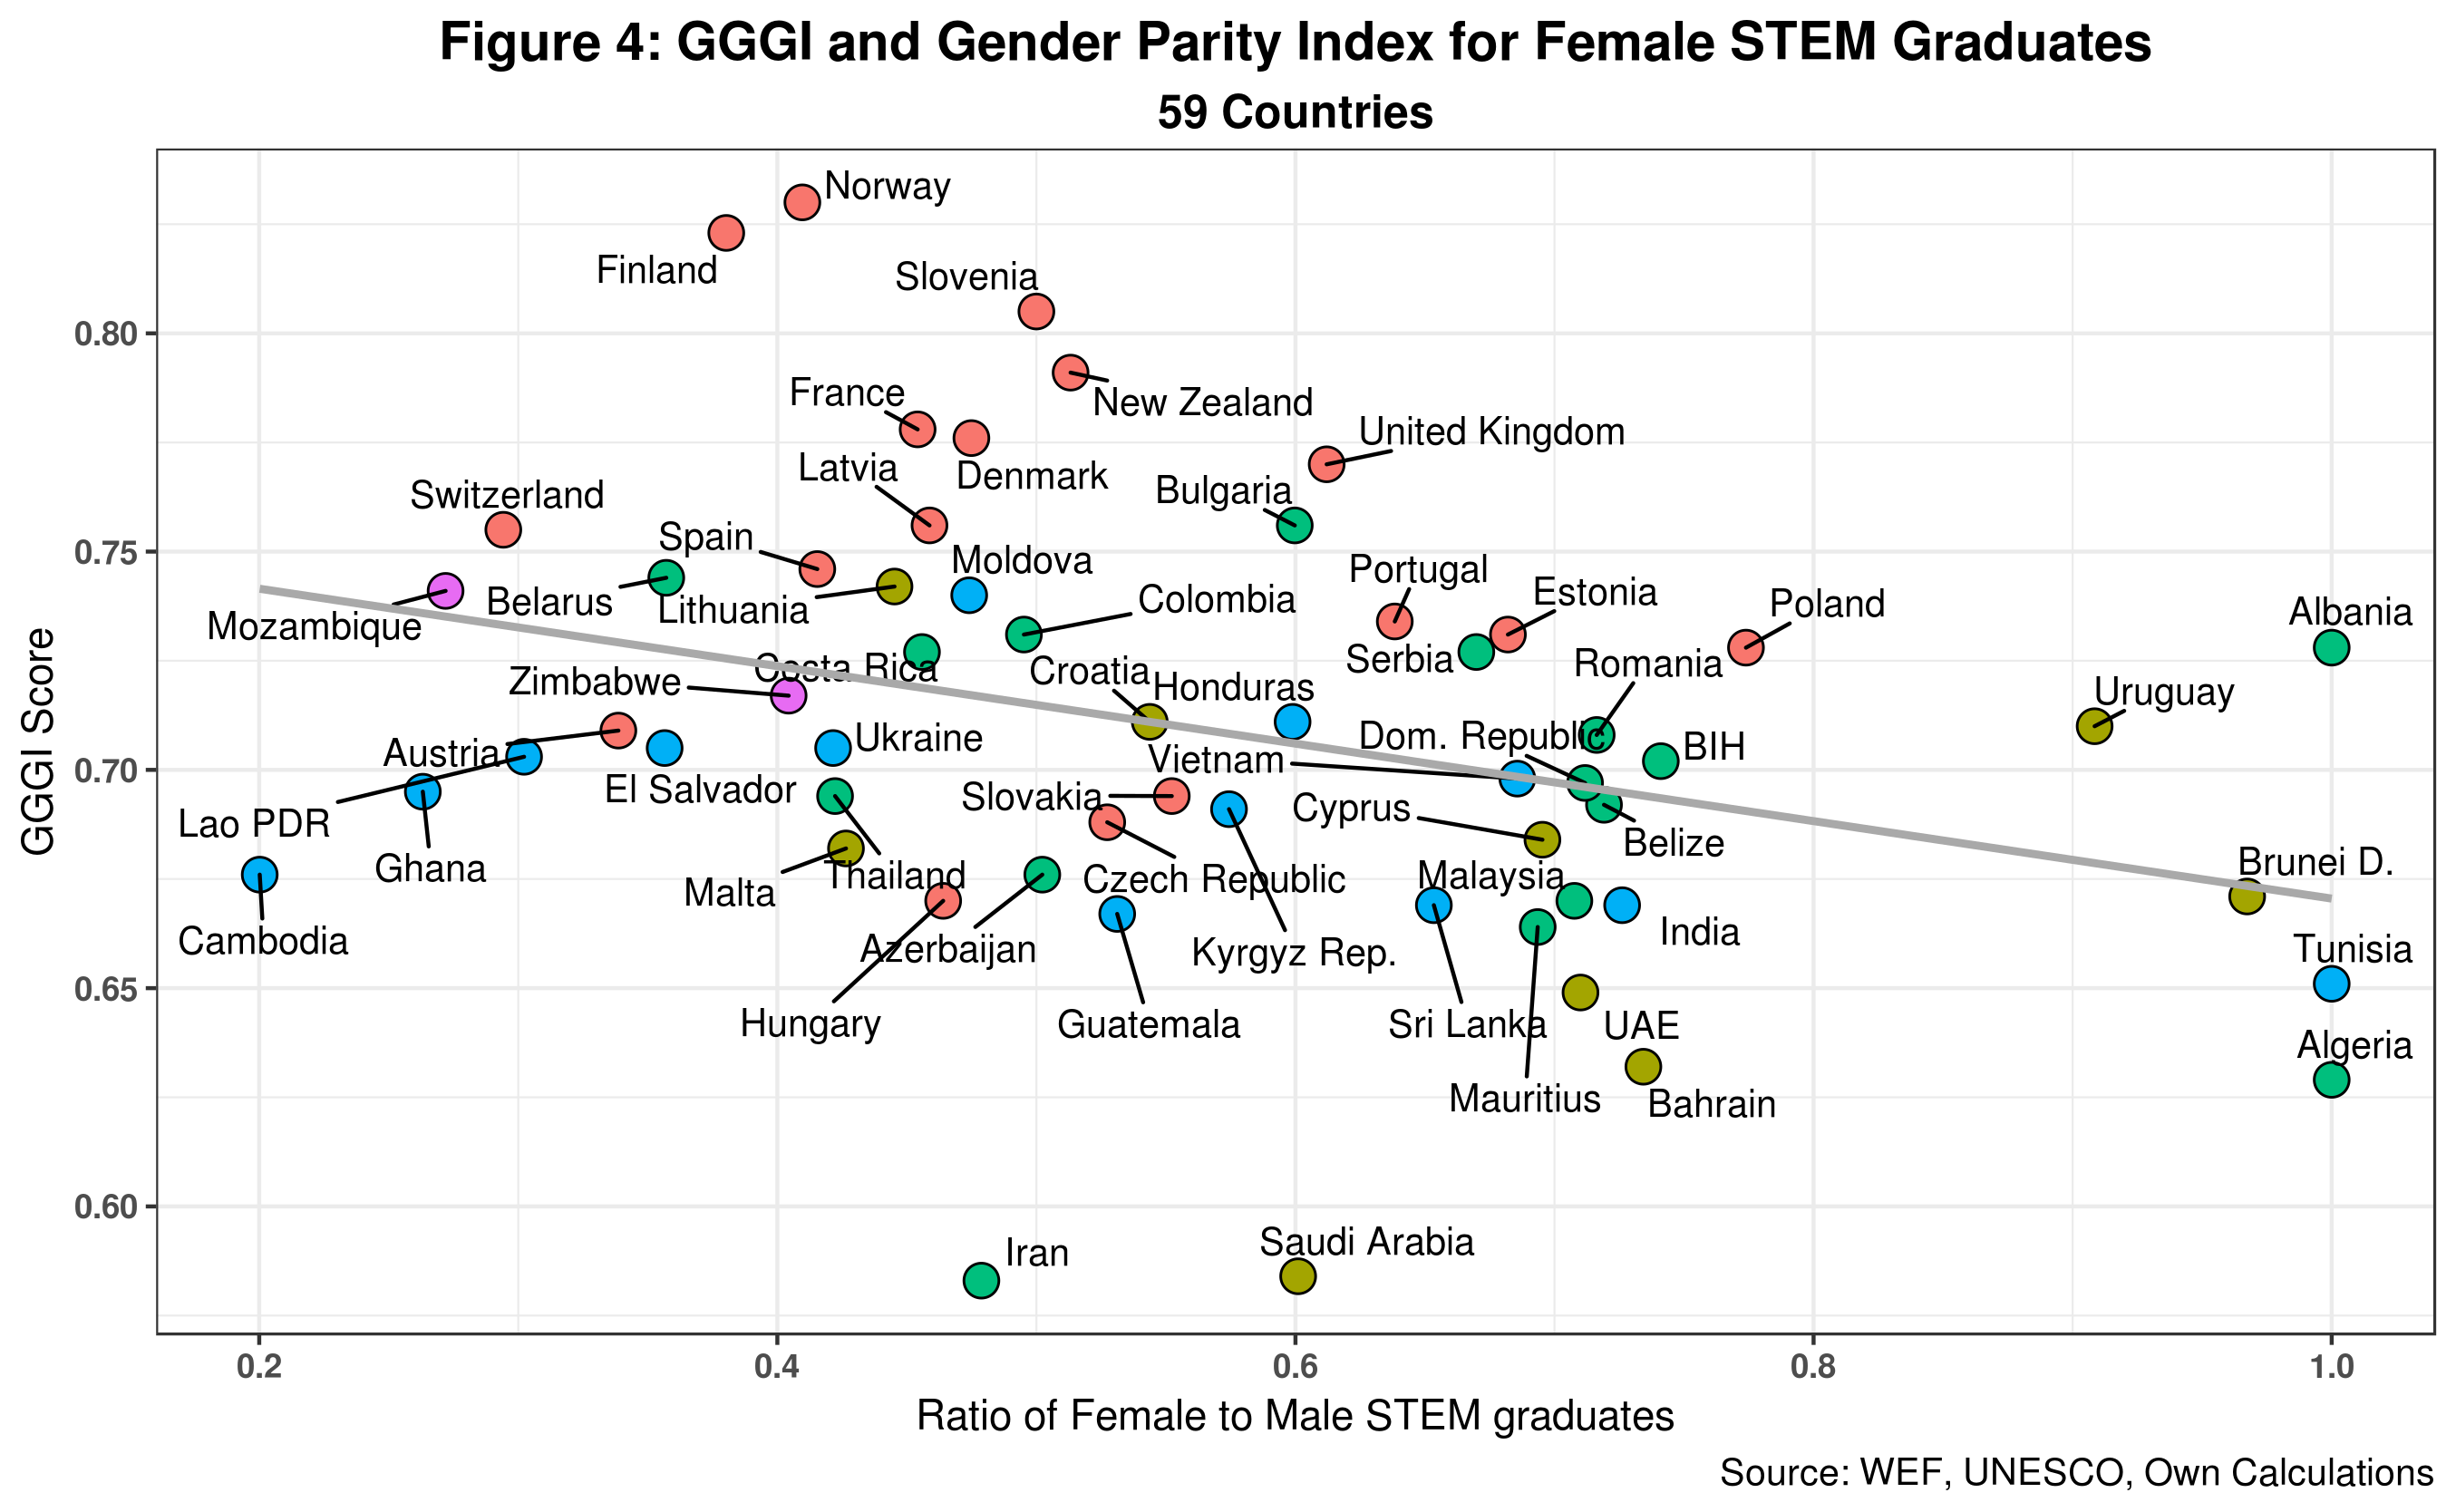 Deconstructing the Gender-Equality Paradox in STEM, Part II